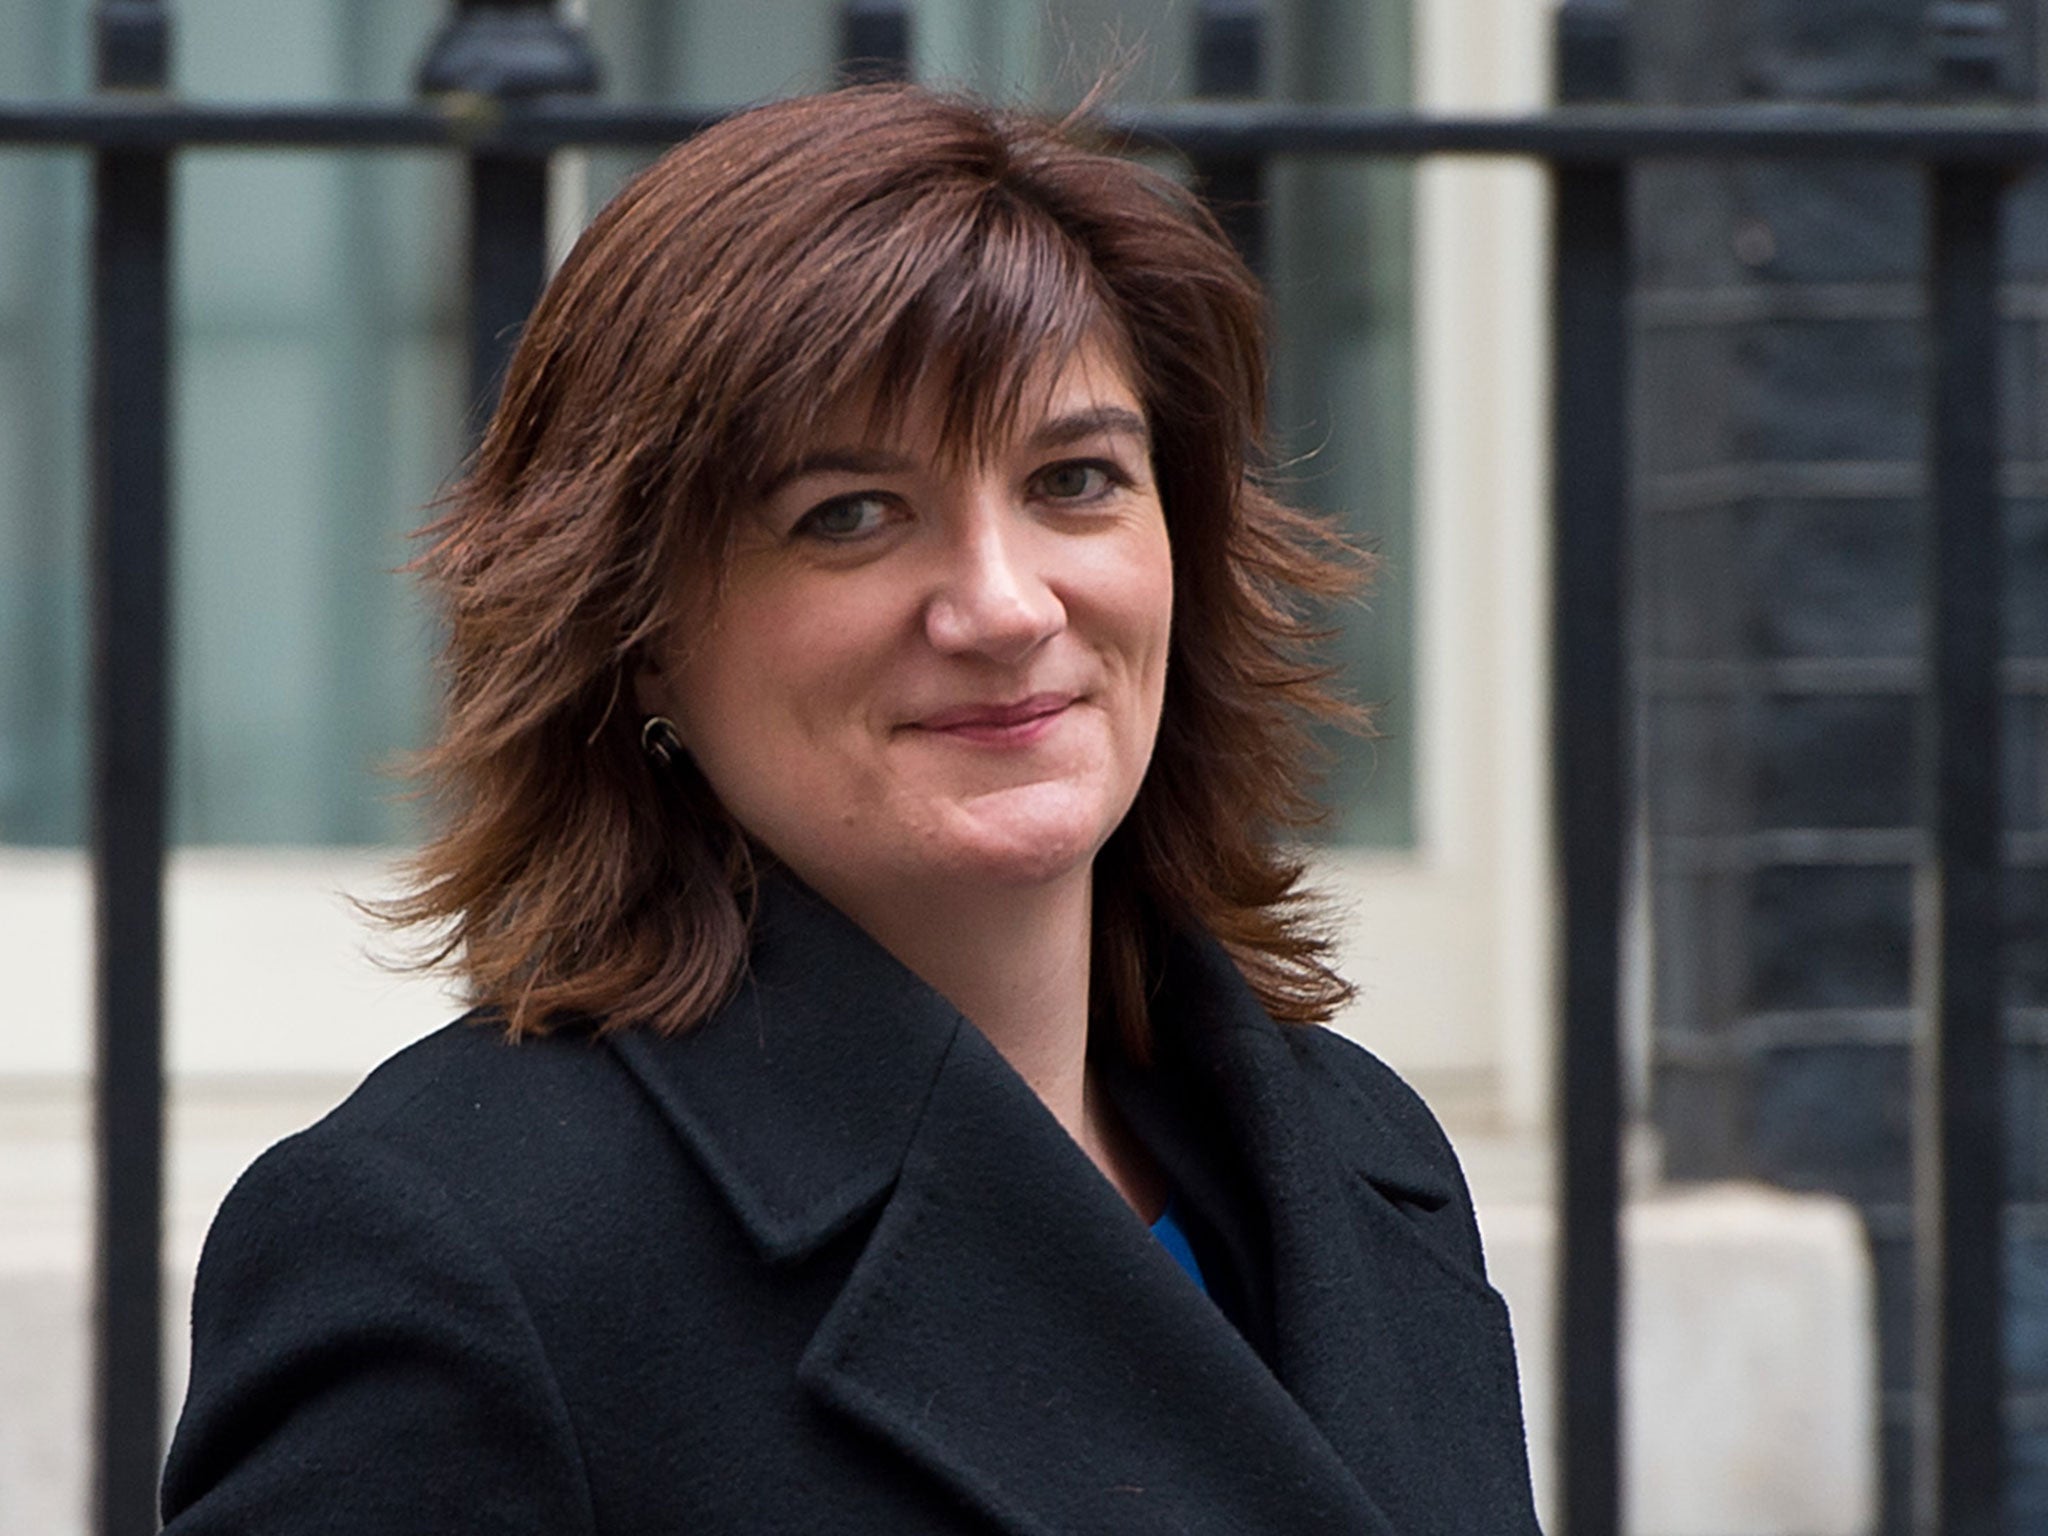 Nicky Morgan said ongoing divisions in the Conservative Party were a cause of 'great sadness'